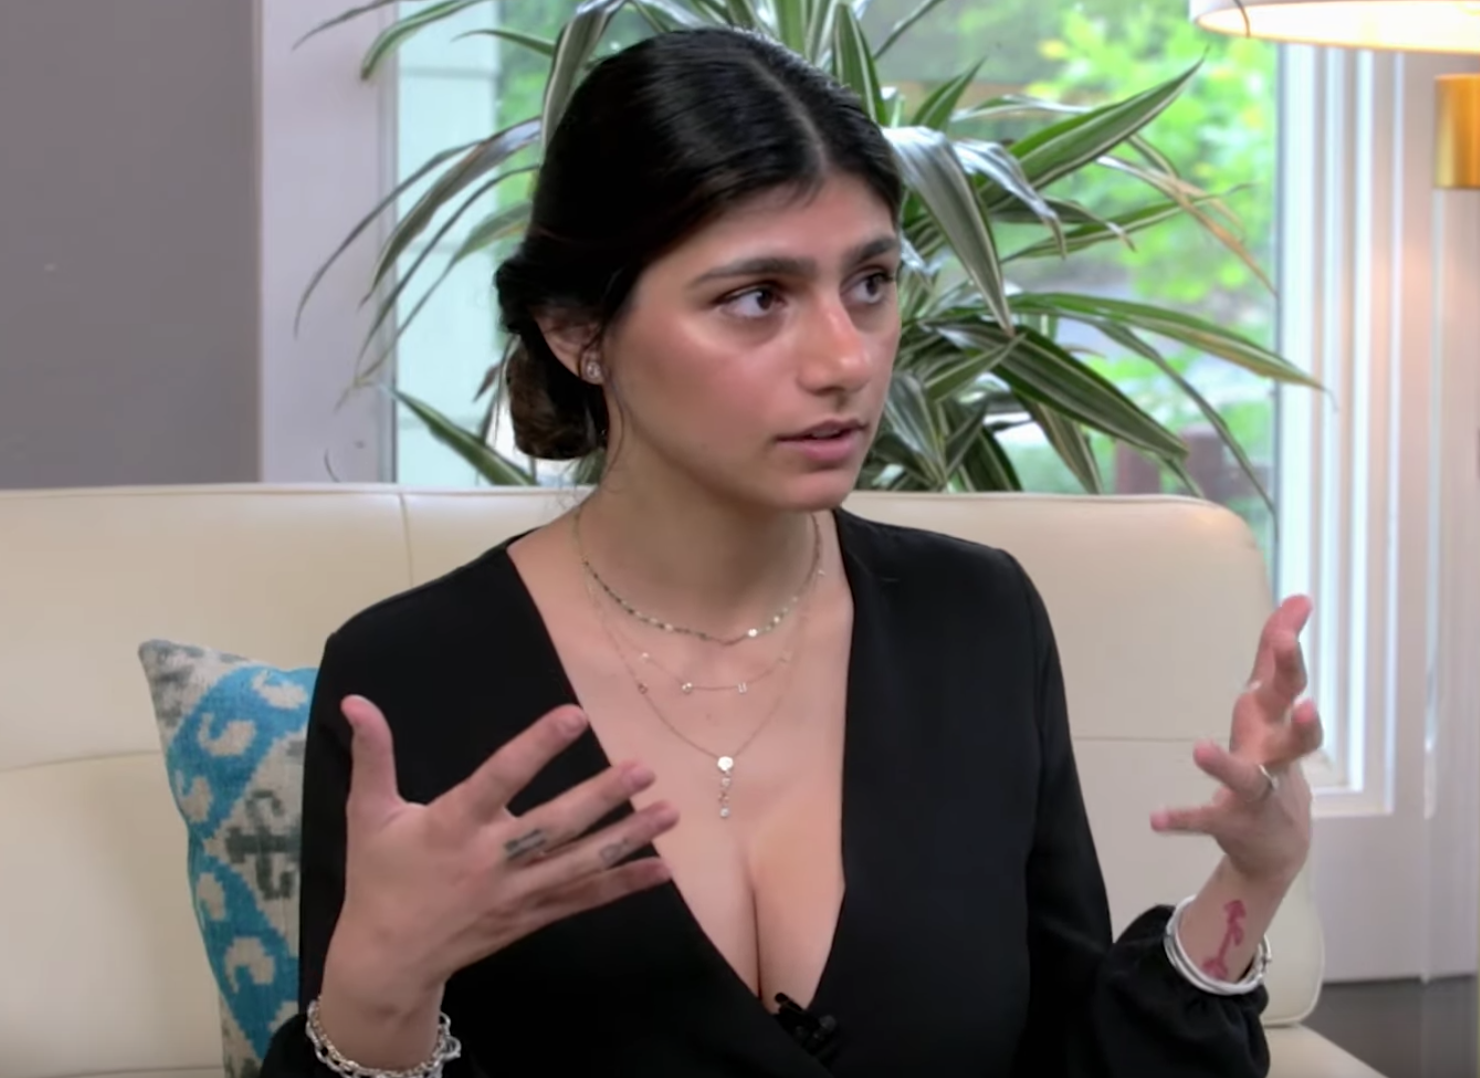 1480px x 1078px - Mia Khalifa Reveals She Only Made $12,000 as an Adult Film Star